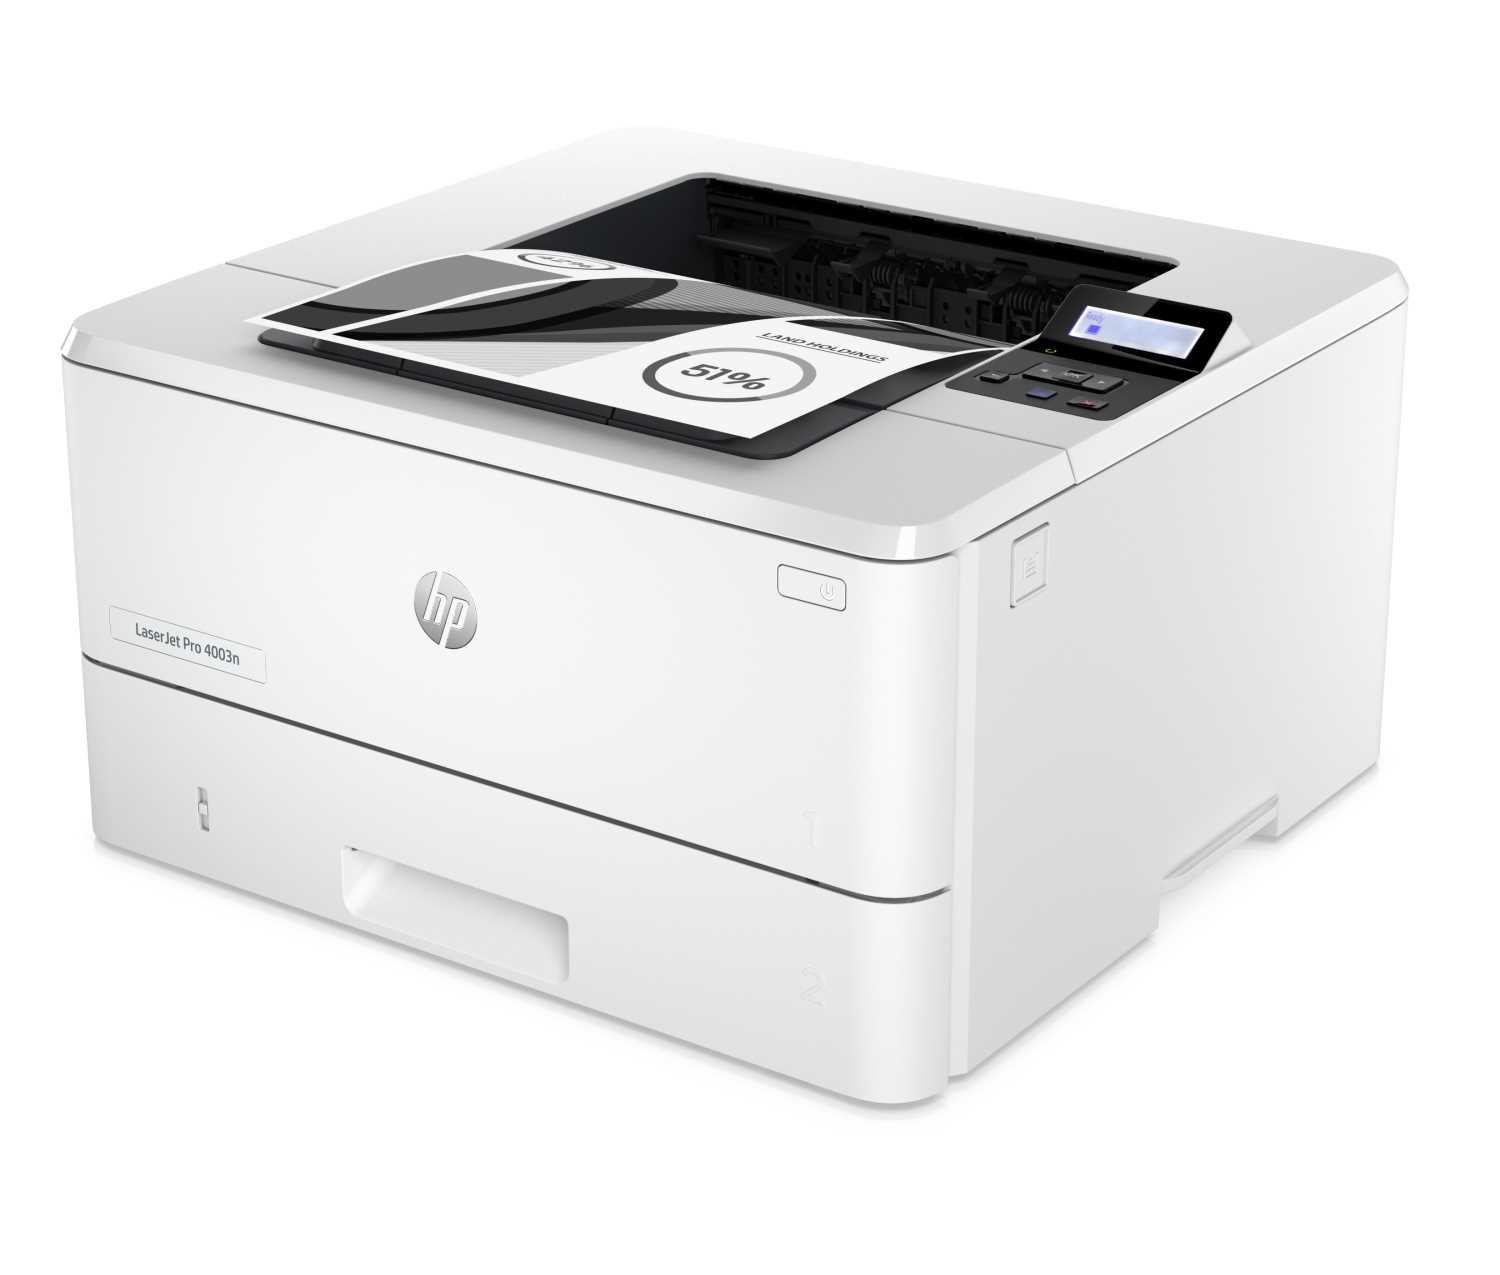 Принтер HP LaserJet Pro 4003n (A4), 40 ppm, 256MB, 1.2 MHz, tray 100+250 pages, USB+Etherneti, Duty - 80K pages